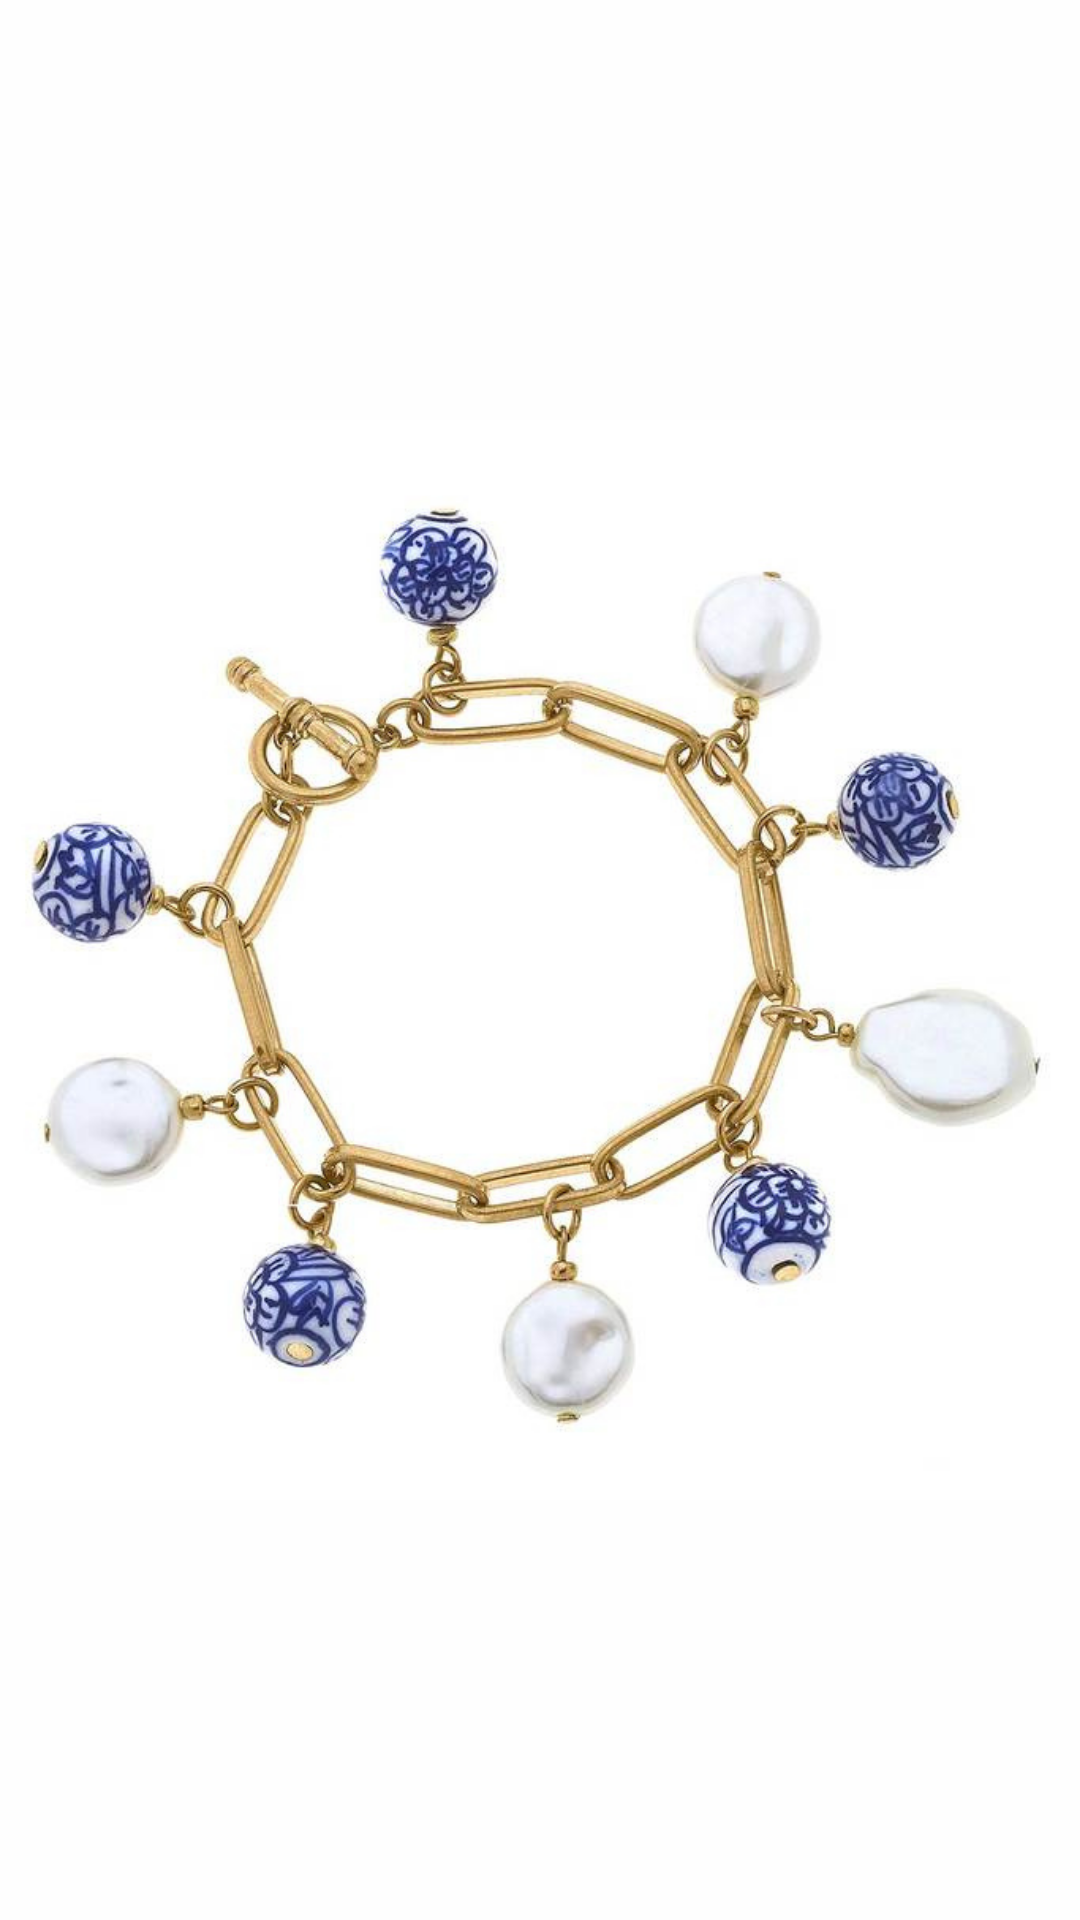 [CANVAS] Paloma Chinoiserie Charm Bracelet in Blue & White